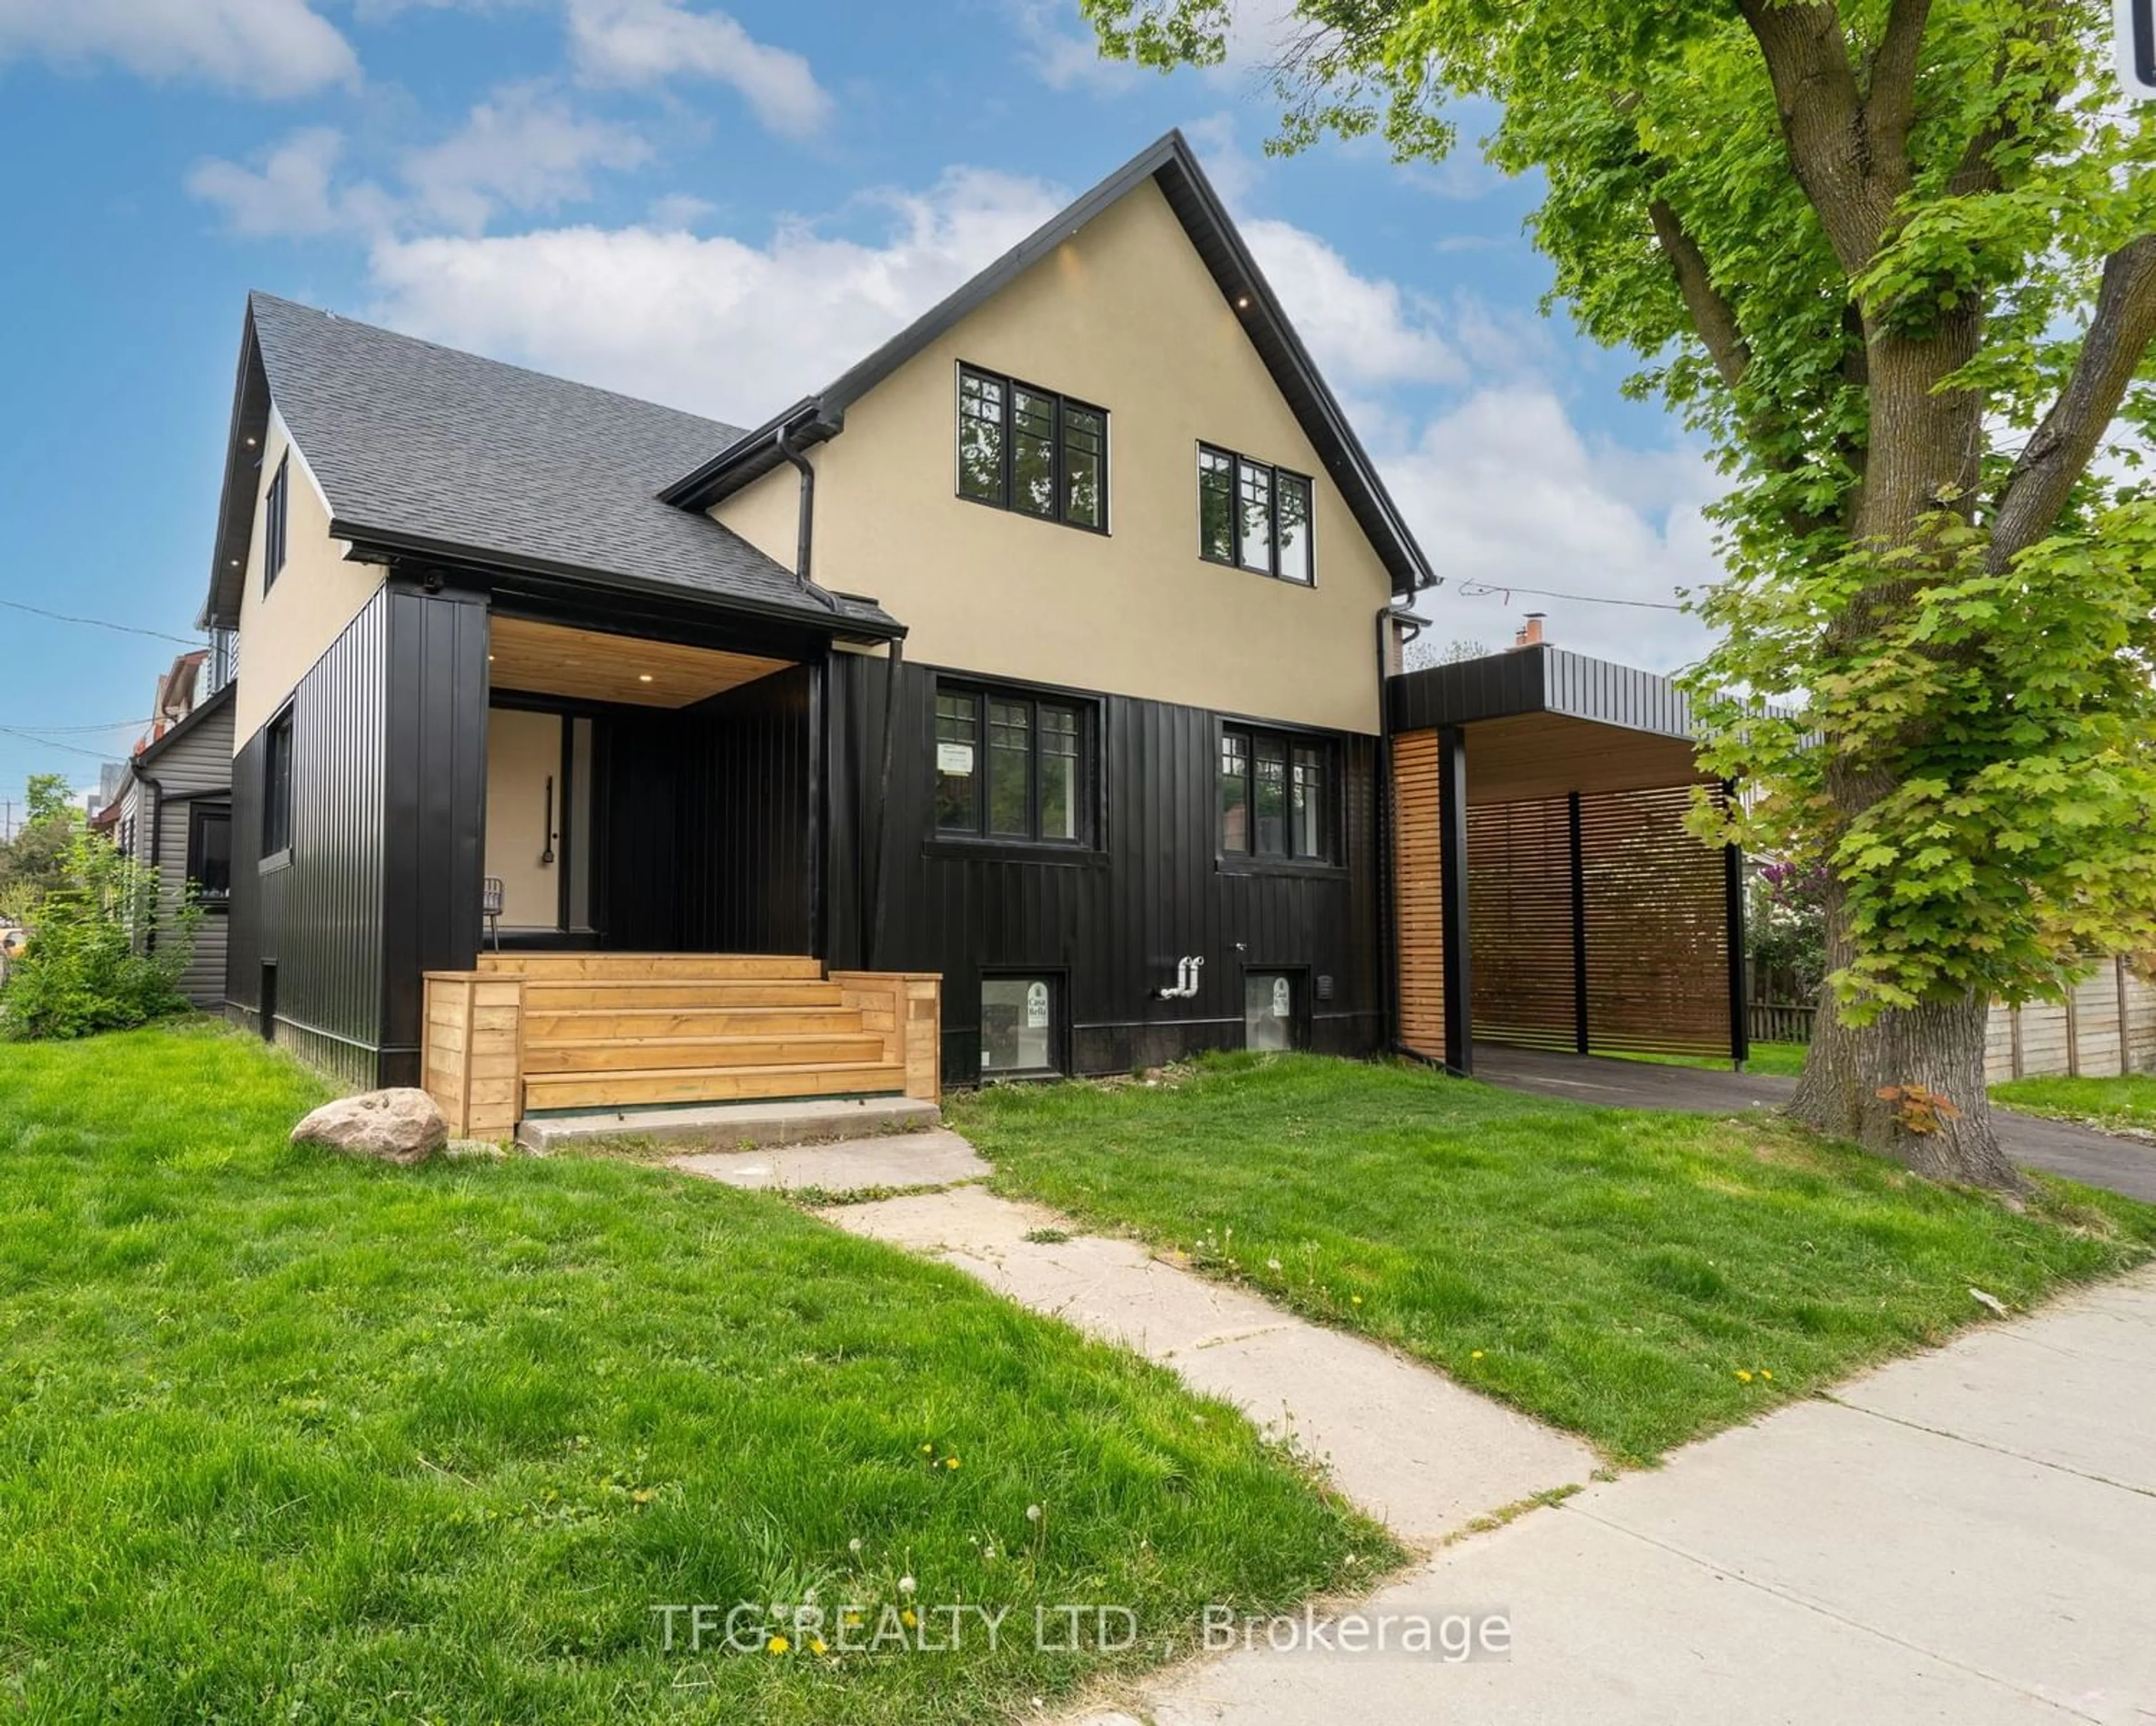 Frontside or backside of a home for 997 Mount Pleasant Rd, Toronto Ontario M4P 2L9